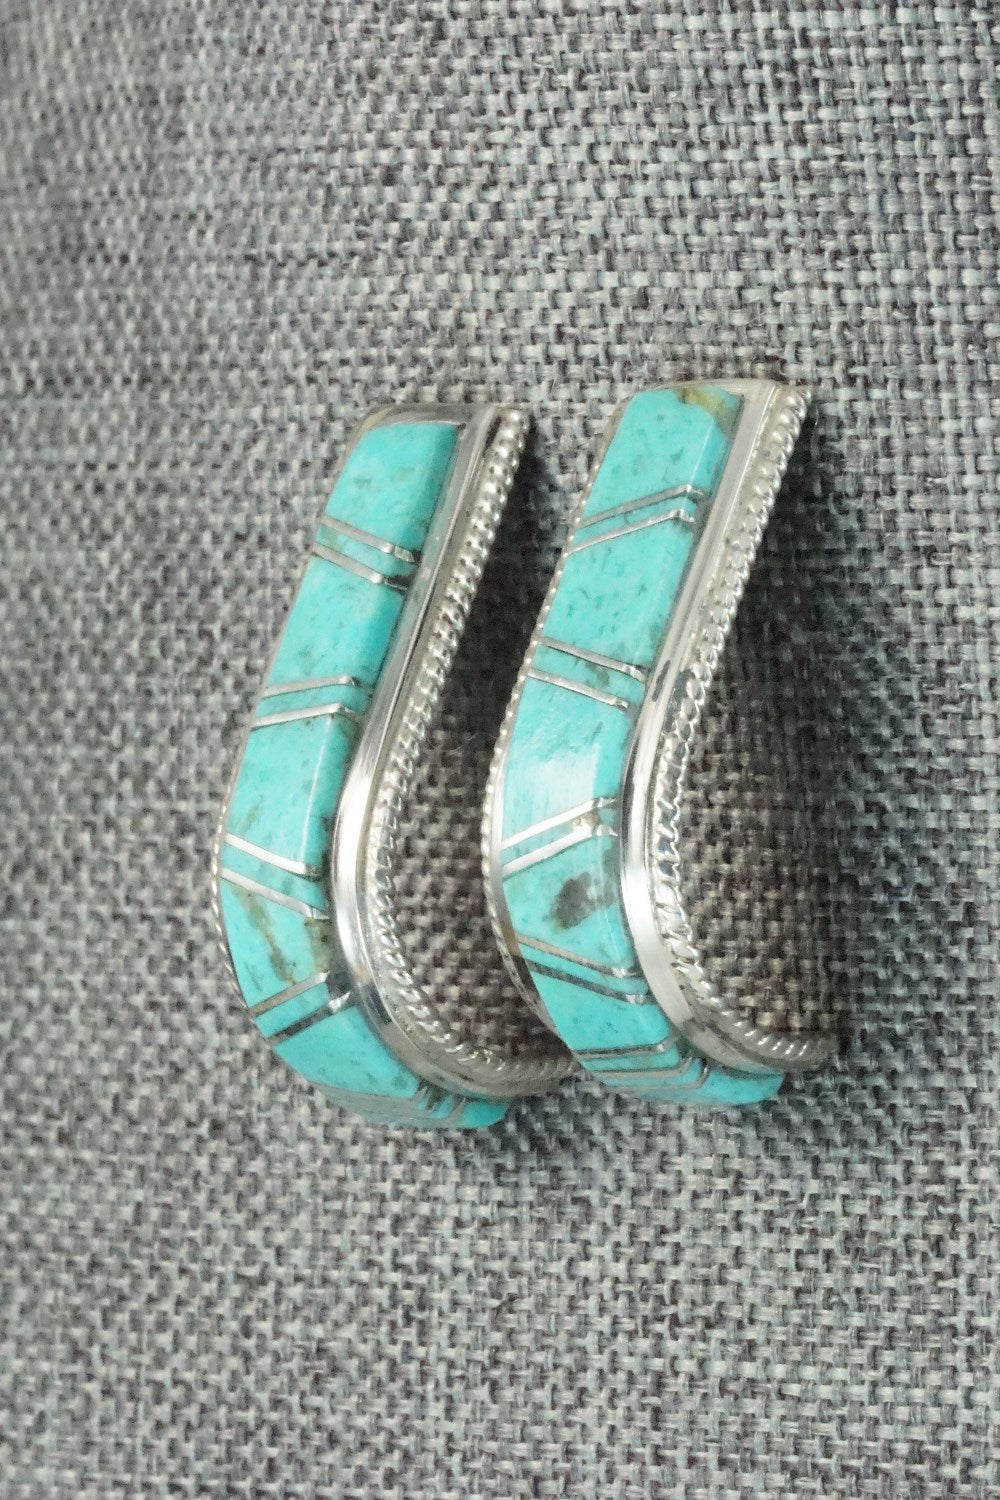 Turquoise & Sterling Silver Inlay Earrings - Deirdre Luna